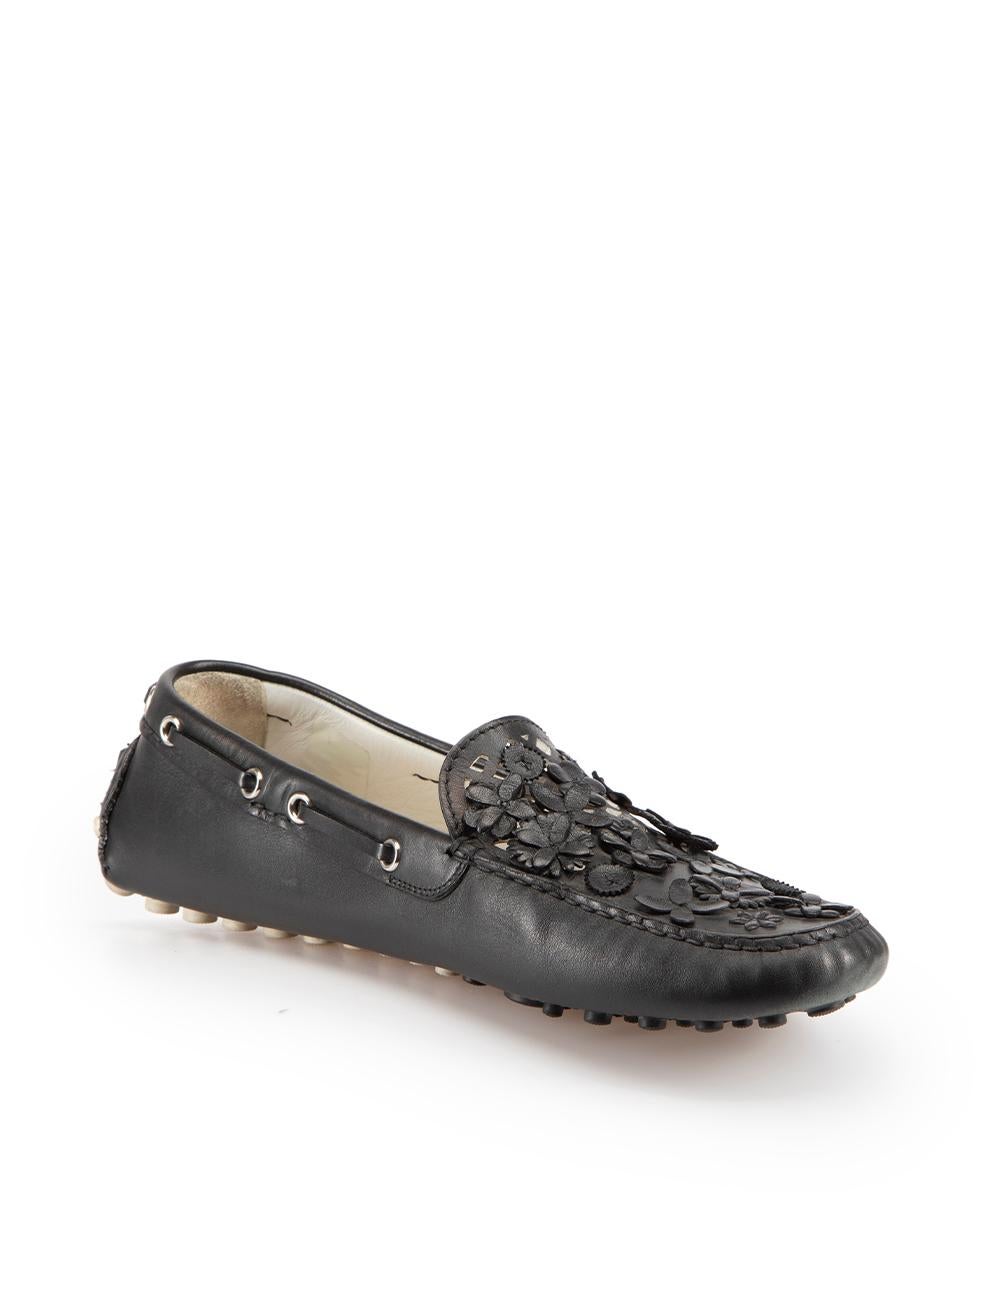 CONDITION is Very good. Hardly any visible wear to exterior of shoes, outsoles show minor signs of wear on this used Dior designer resale item. These shoes come with original dust bag.



Details


Black

Leather

Slip-on loafers

Perforated diamond